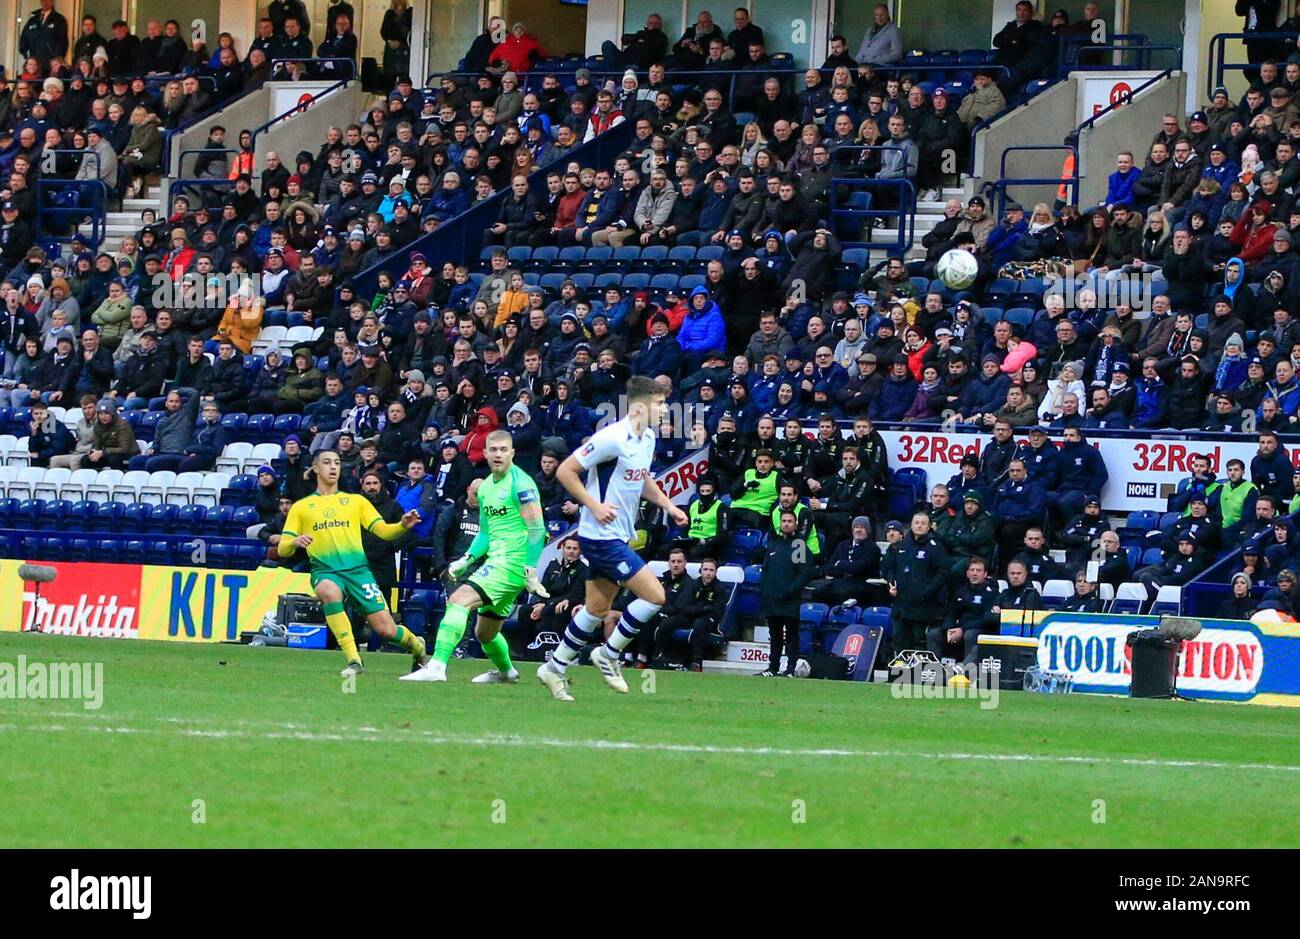 4th January 2020, Deepdale, Preston, England; Emirates FA Cup, Preston North End v Norwich City : Adam Idah (35) of Norwich City lobs the ball into the net for Norwich’s third goal in the 38th minute with Connor Ripley (25) of Preston North End well out of his area Credit: Conor Molloy/News Images Stock Photo